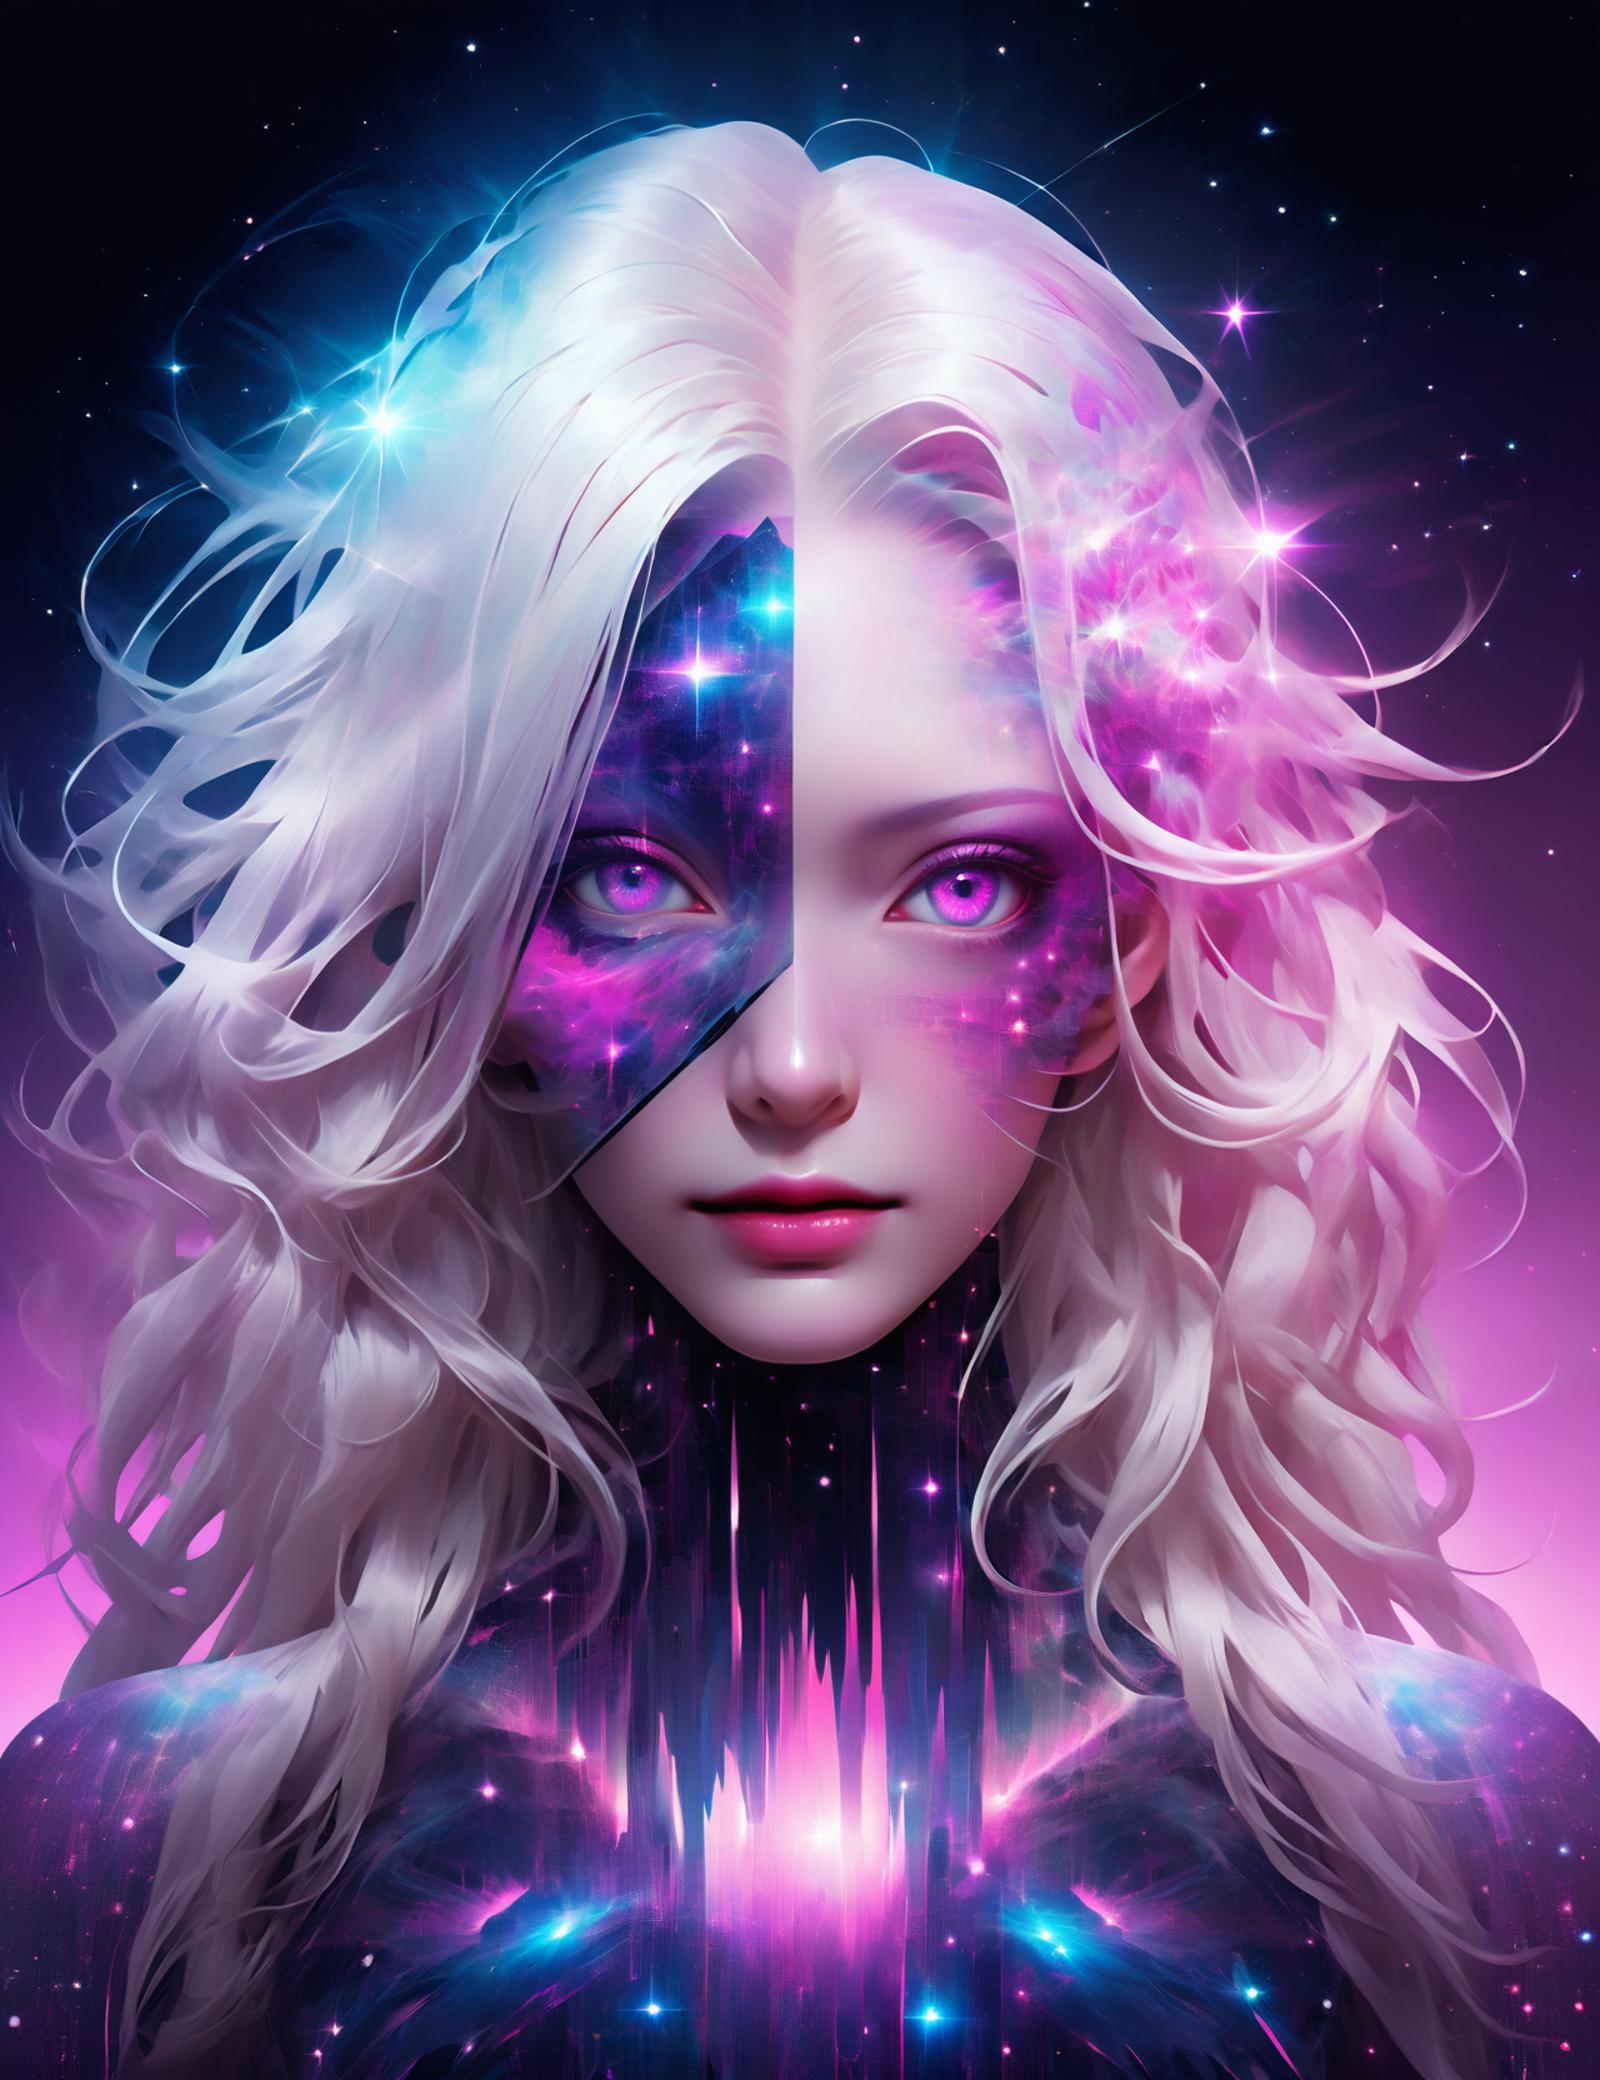 Blonde-haired Woman with Purple Starry Eyes and White Hair, Artistic Illustration.